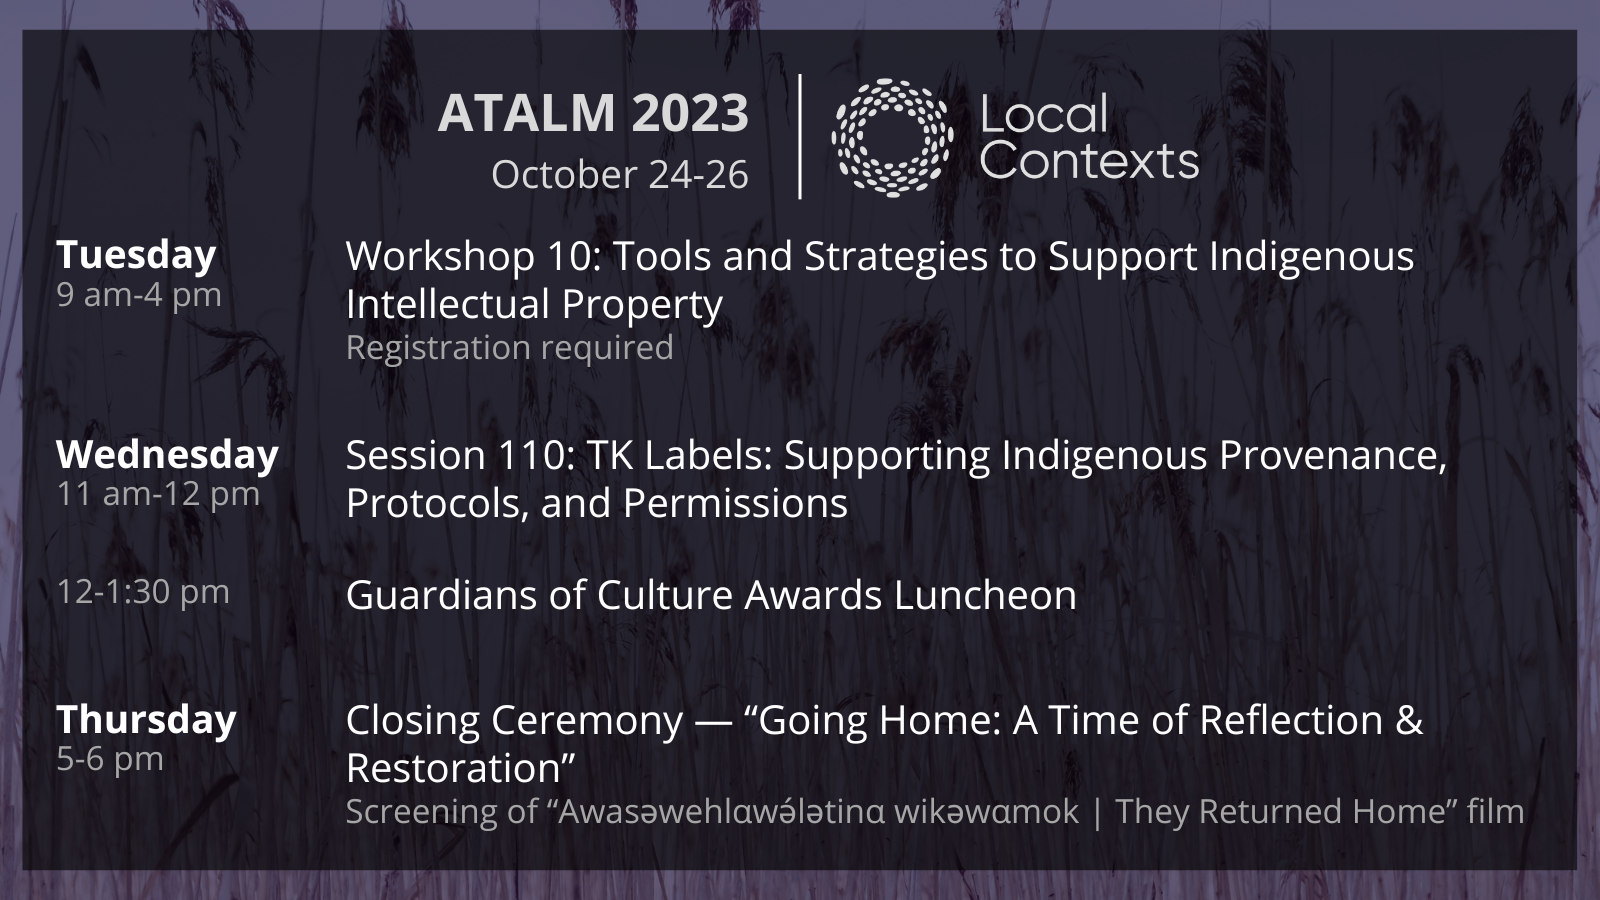 Text on decorative purple background. “ATALM 2023, October 24-26. Local Contexts. Tuesday, 9am-4pm. Workshop 10: Tools and Strategies to Support Indigenous Intellectual Property. Registration required. Wednesday, 11am-12pm. Session 110: TK Labels: Supporting Indigenous Provenance, Protocols, and Permissions. 12-1:30 pm. Guardians of Culture Awards Luncheon. Thursday, 5-6 pm. Closing Ceremony — Going Home: A Time of Reflection & Restoration. Screening of Awasəwehlαwə́lətinα wikəwαmok | They Returned Home film.”